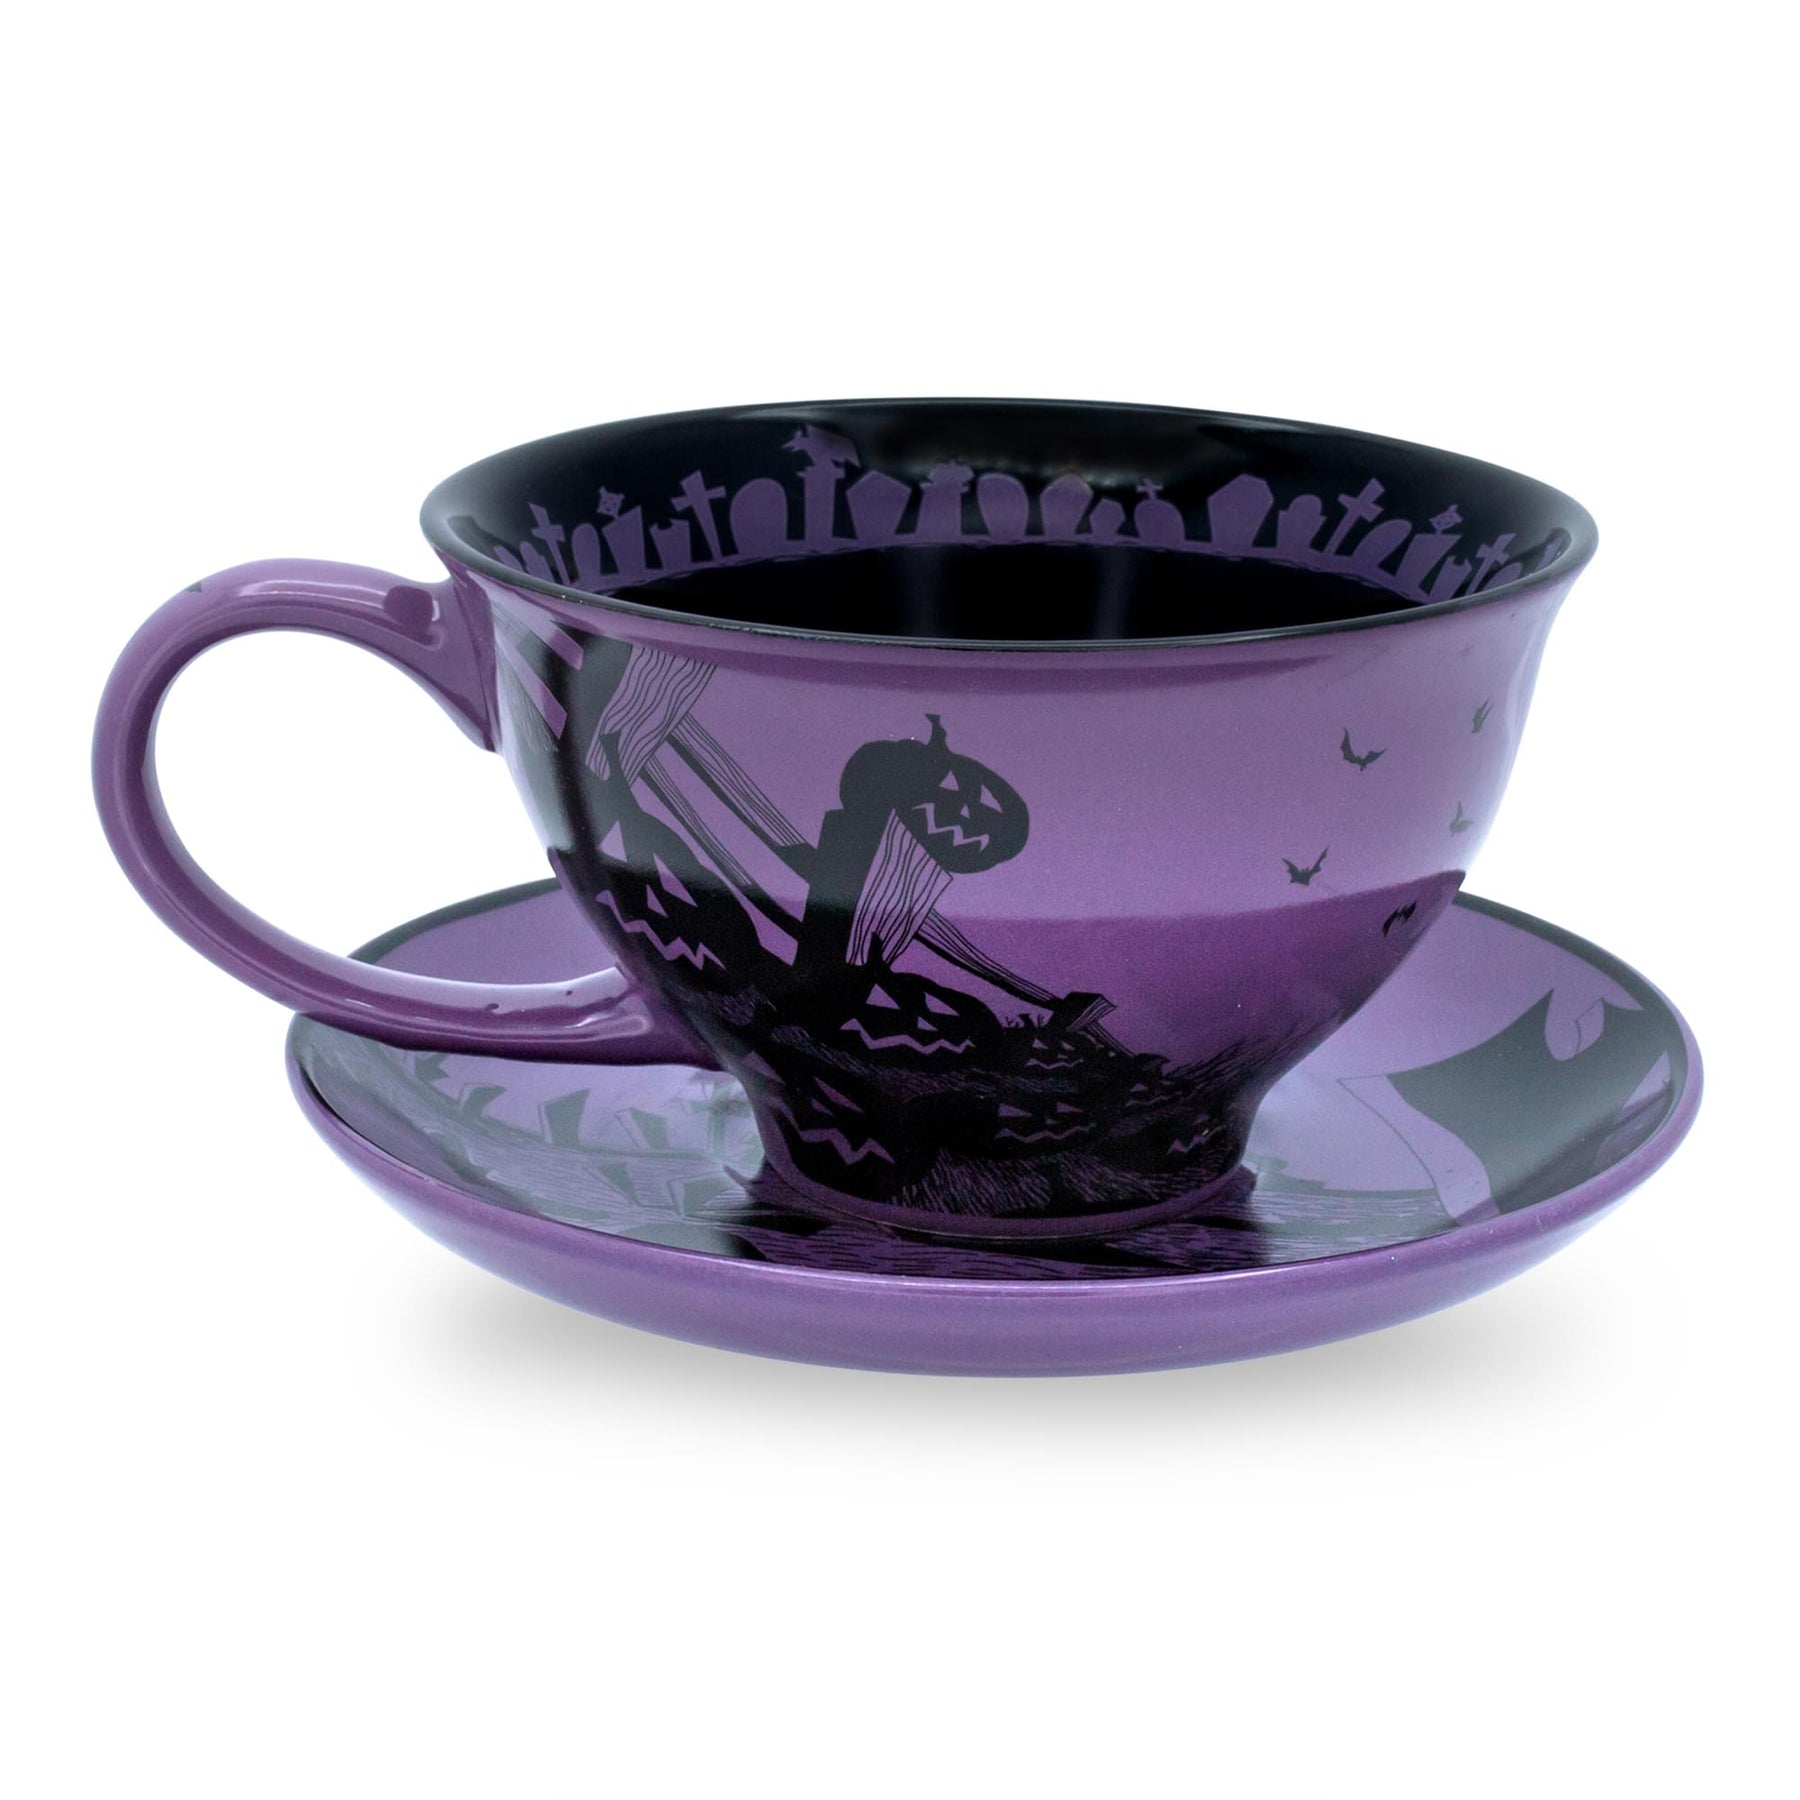 Disney The Nightmare Before Christmas Spiral Hill Ceramic Teacup and Saucer Set